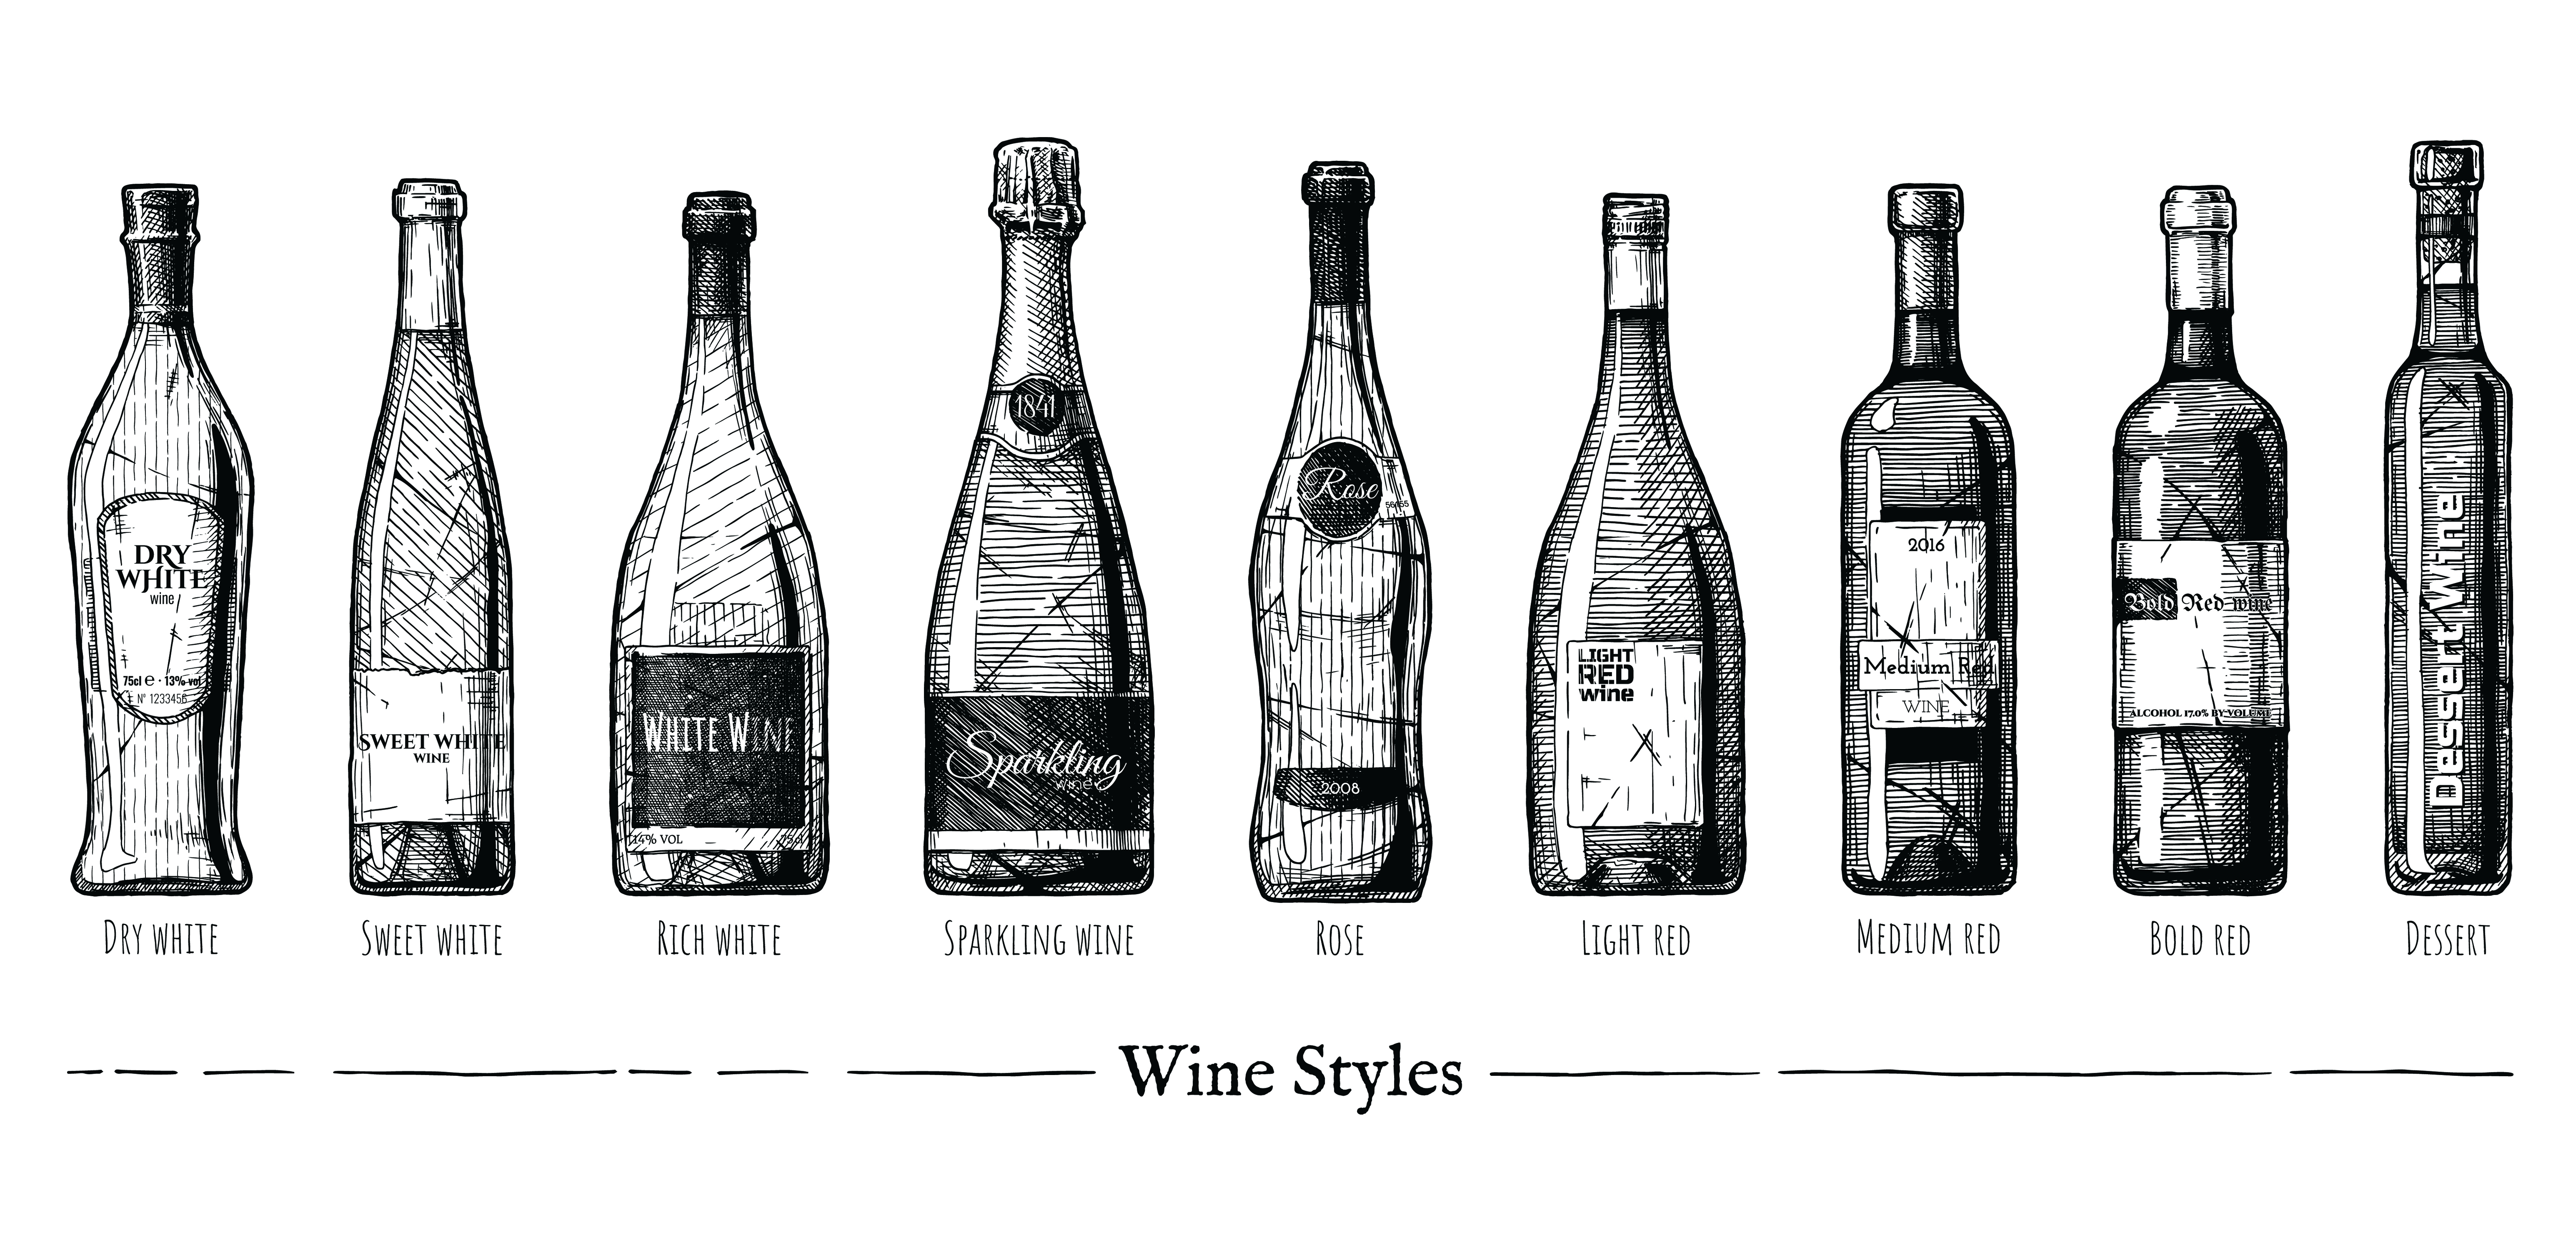 residual sugar in wine plays a role in wine bottle style. Lineup of wine bottle styles